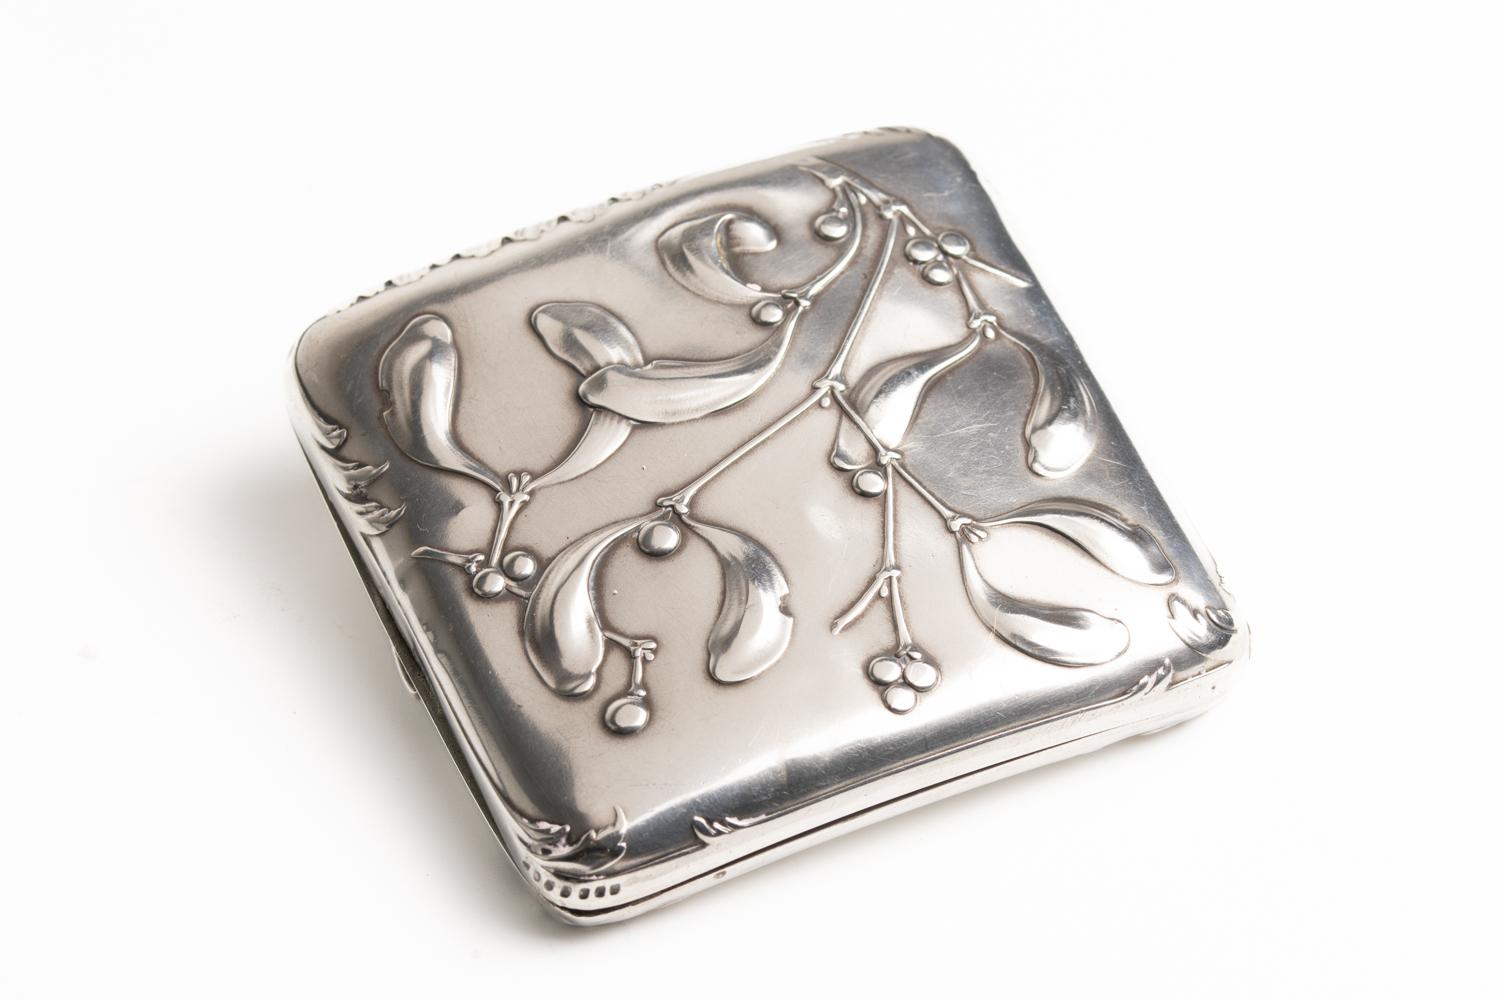  French Art Nouveau Silver Cigarette Case By Charles Murat For Sale 7